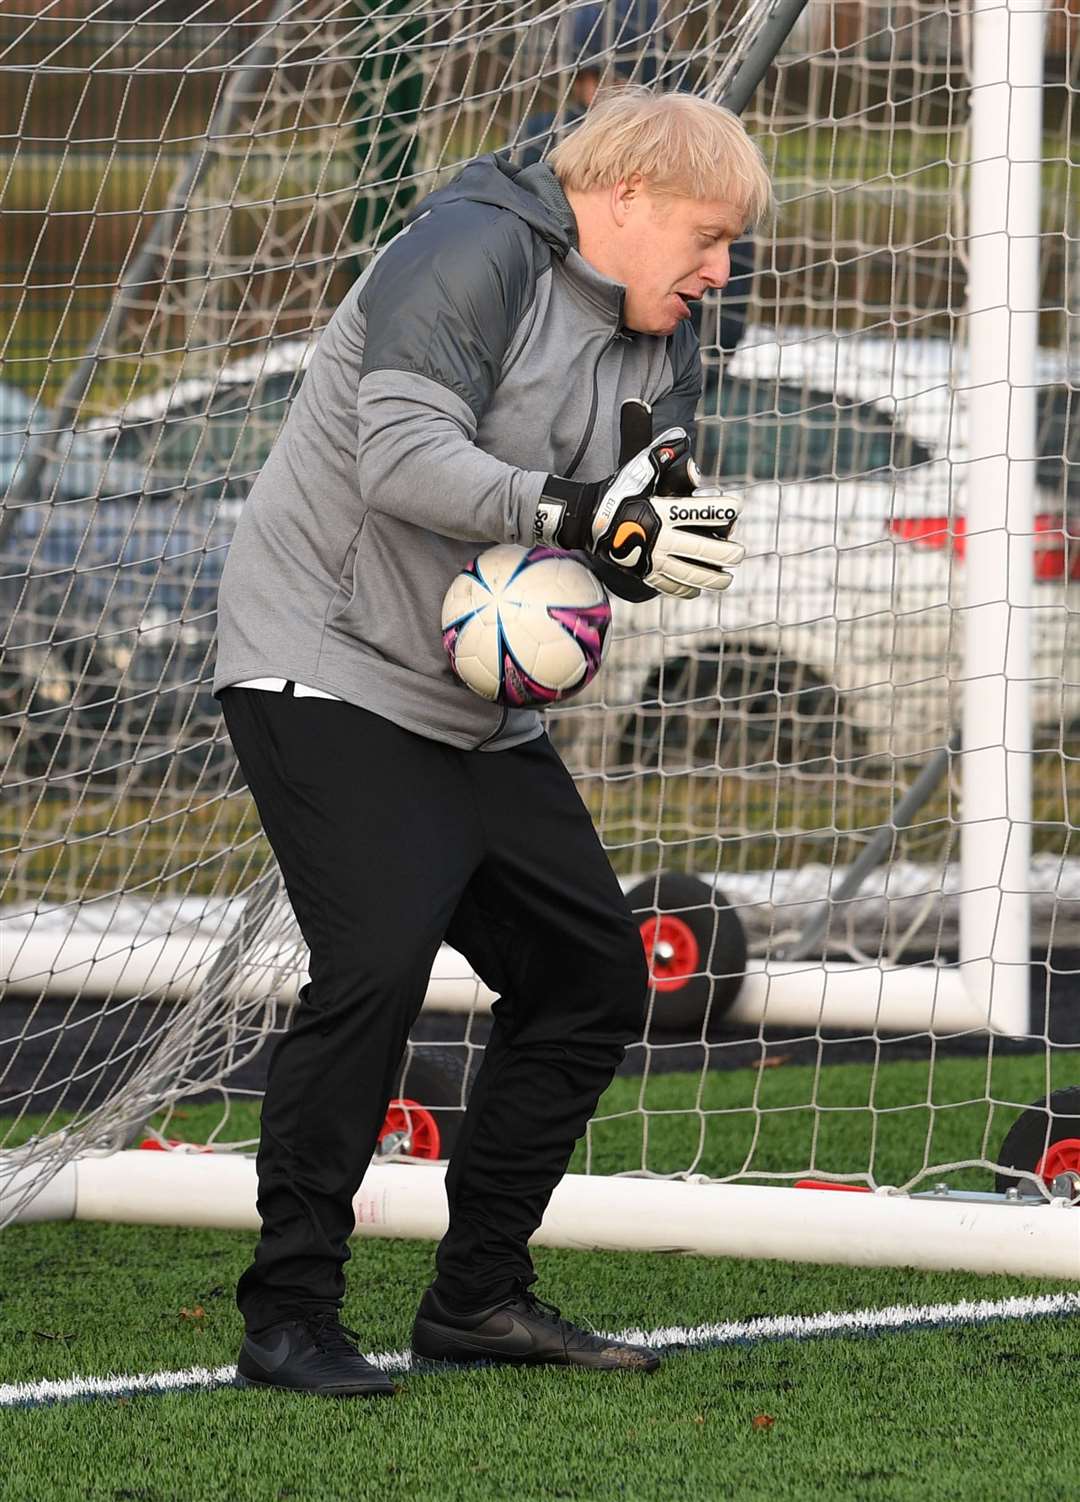 During the general election campaign in December 2019, Mr Johnson tried his hand in goal in the Cheshire Girls football league in Cheadle Hume (Stefan Rousseau/PA)